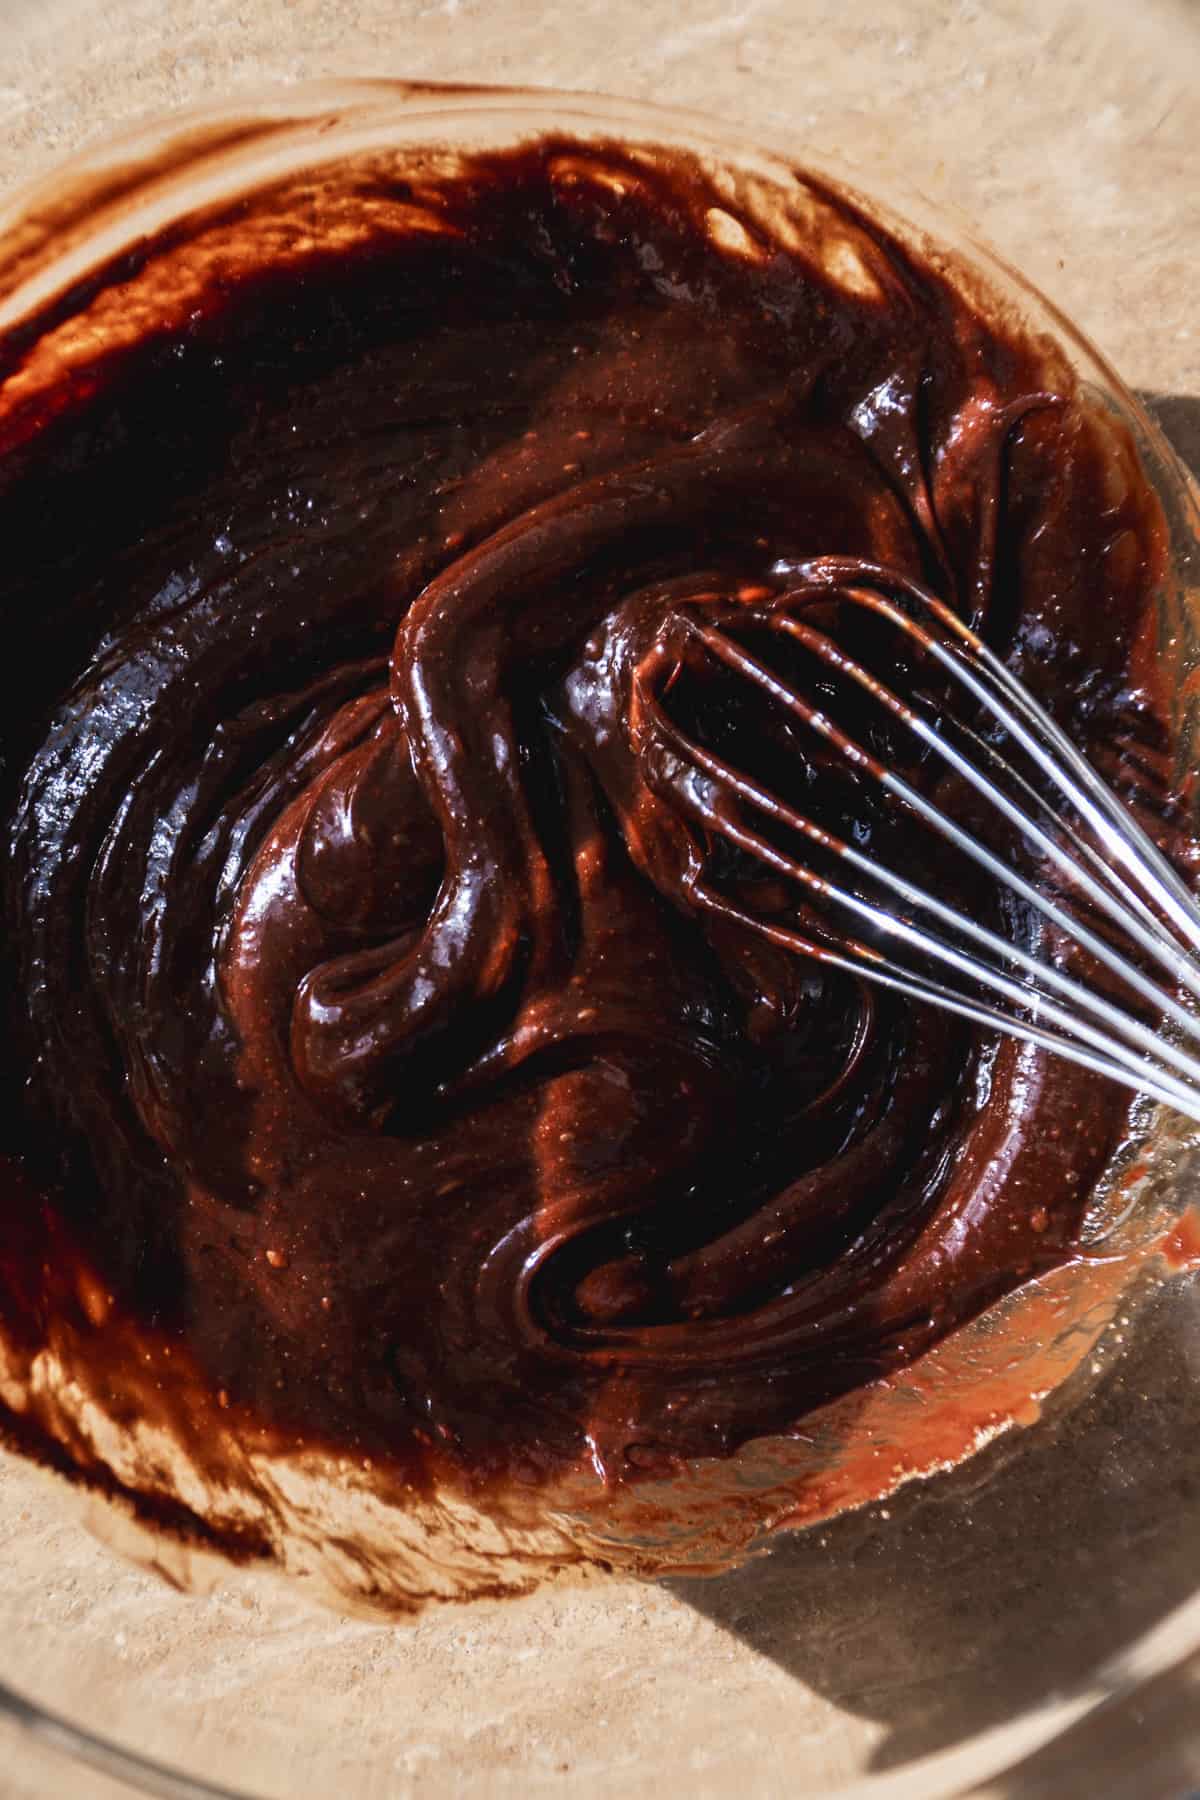 Chocolate flourless cake batter in a bowl with a whisk.